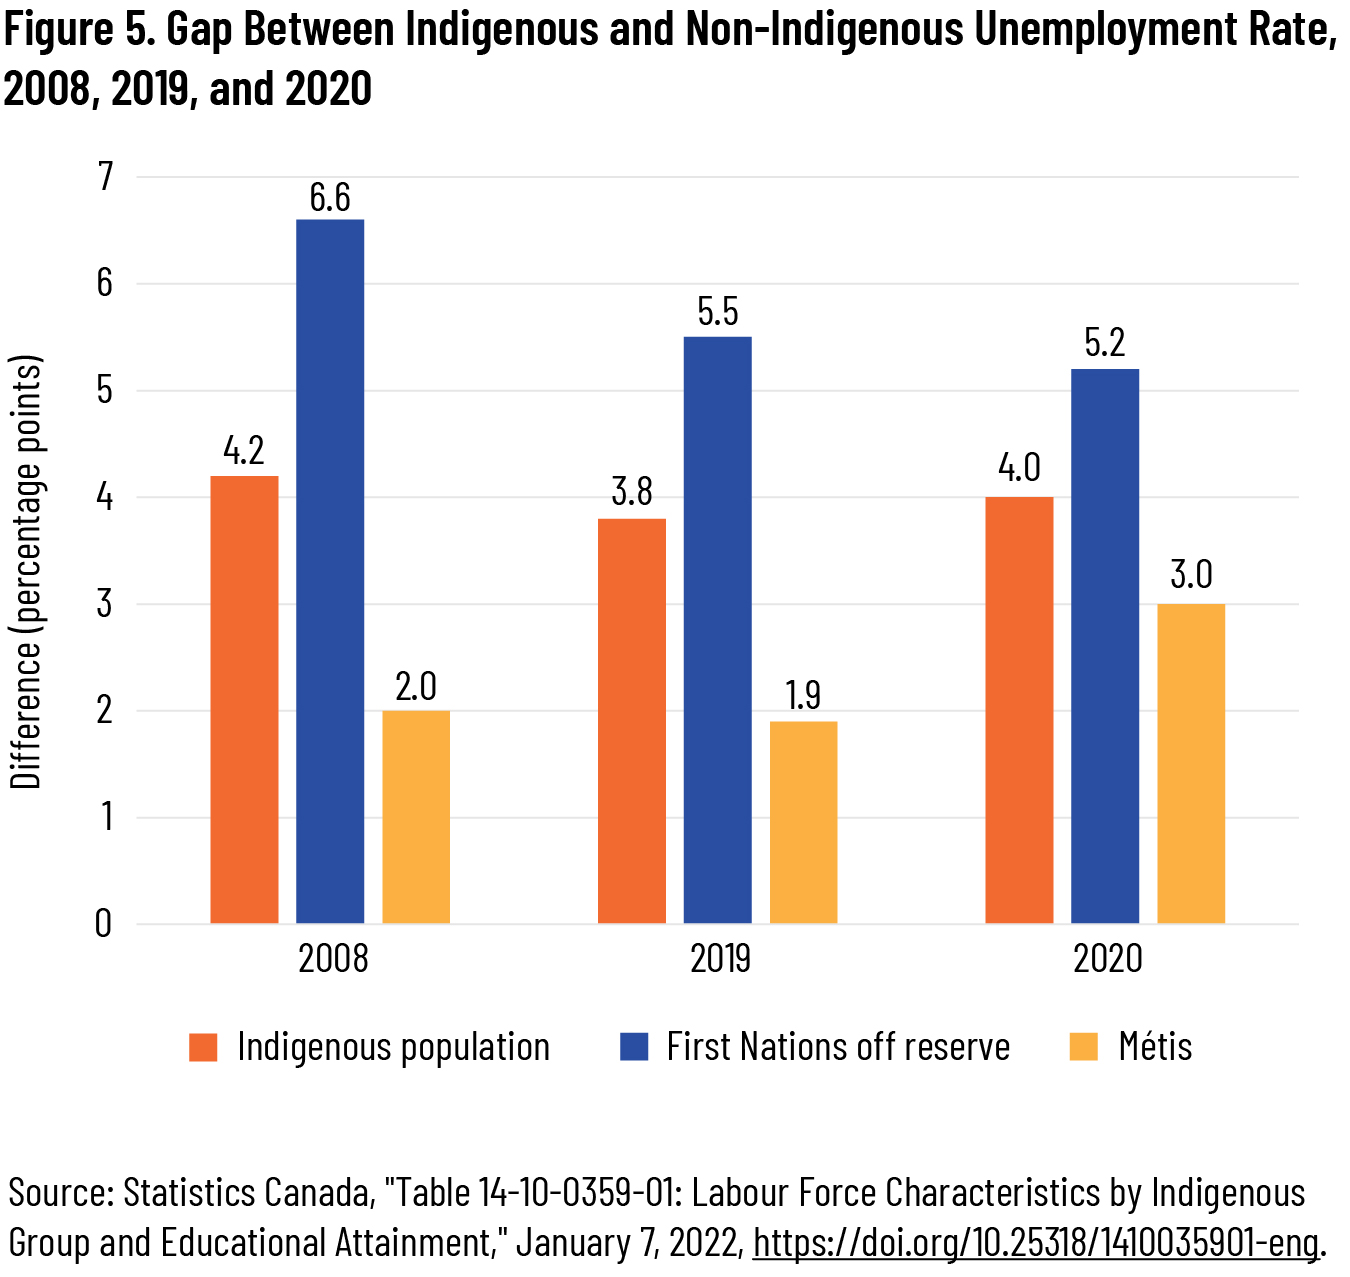 Figure 5. Gap Between Indigenous and Non-Indigenous Unemployment Rate, 2008, 2019, and 2020